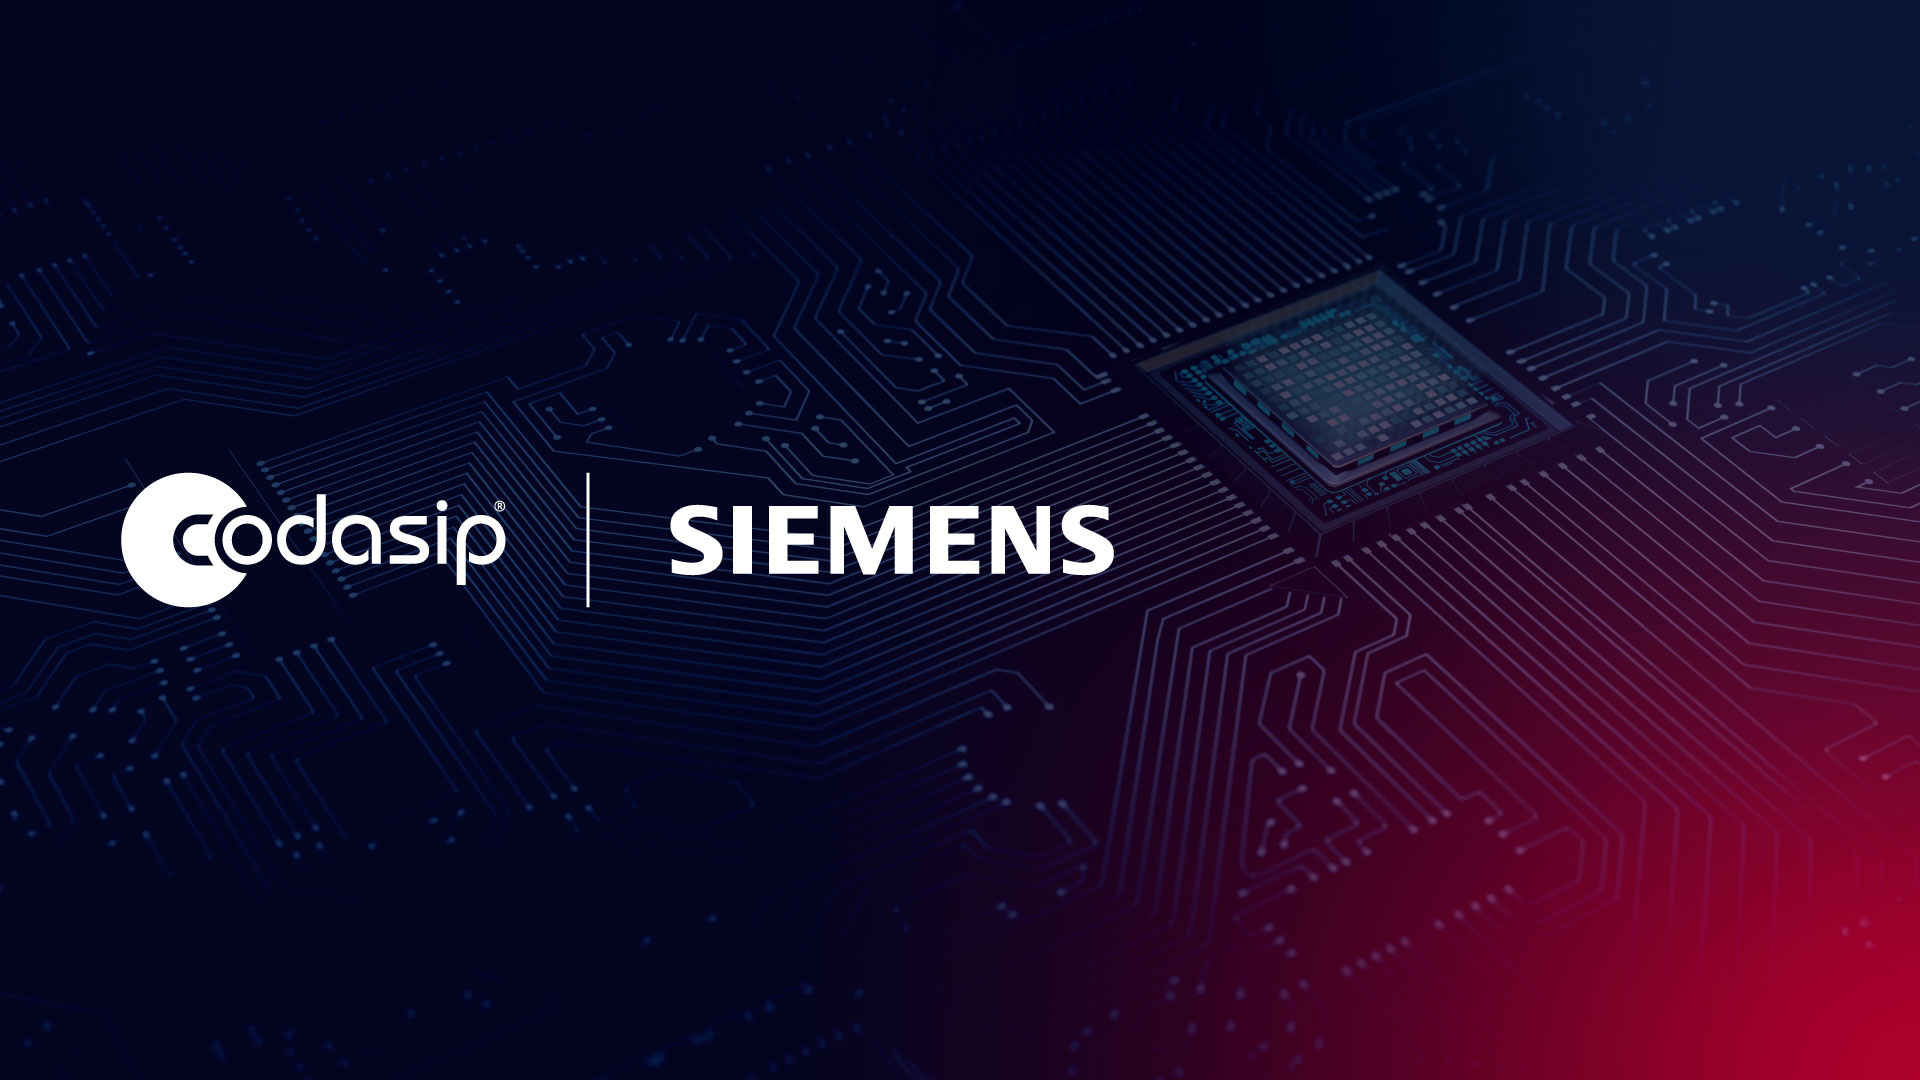 Siemens: Codasip, A leading supplier of processing solutions for IC designers, An engineering and electronics company. 1920x1080 Full HD Wallpaper.